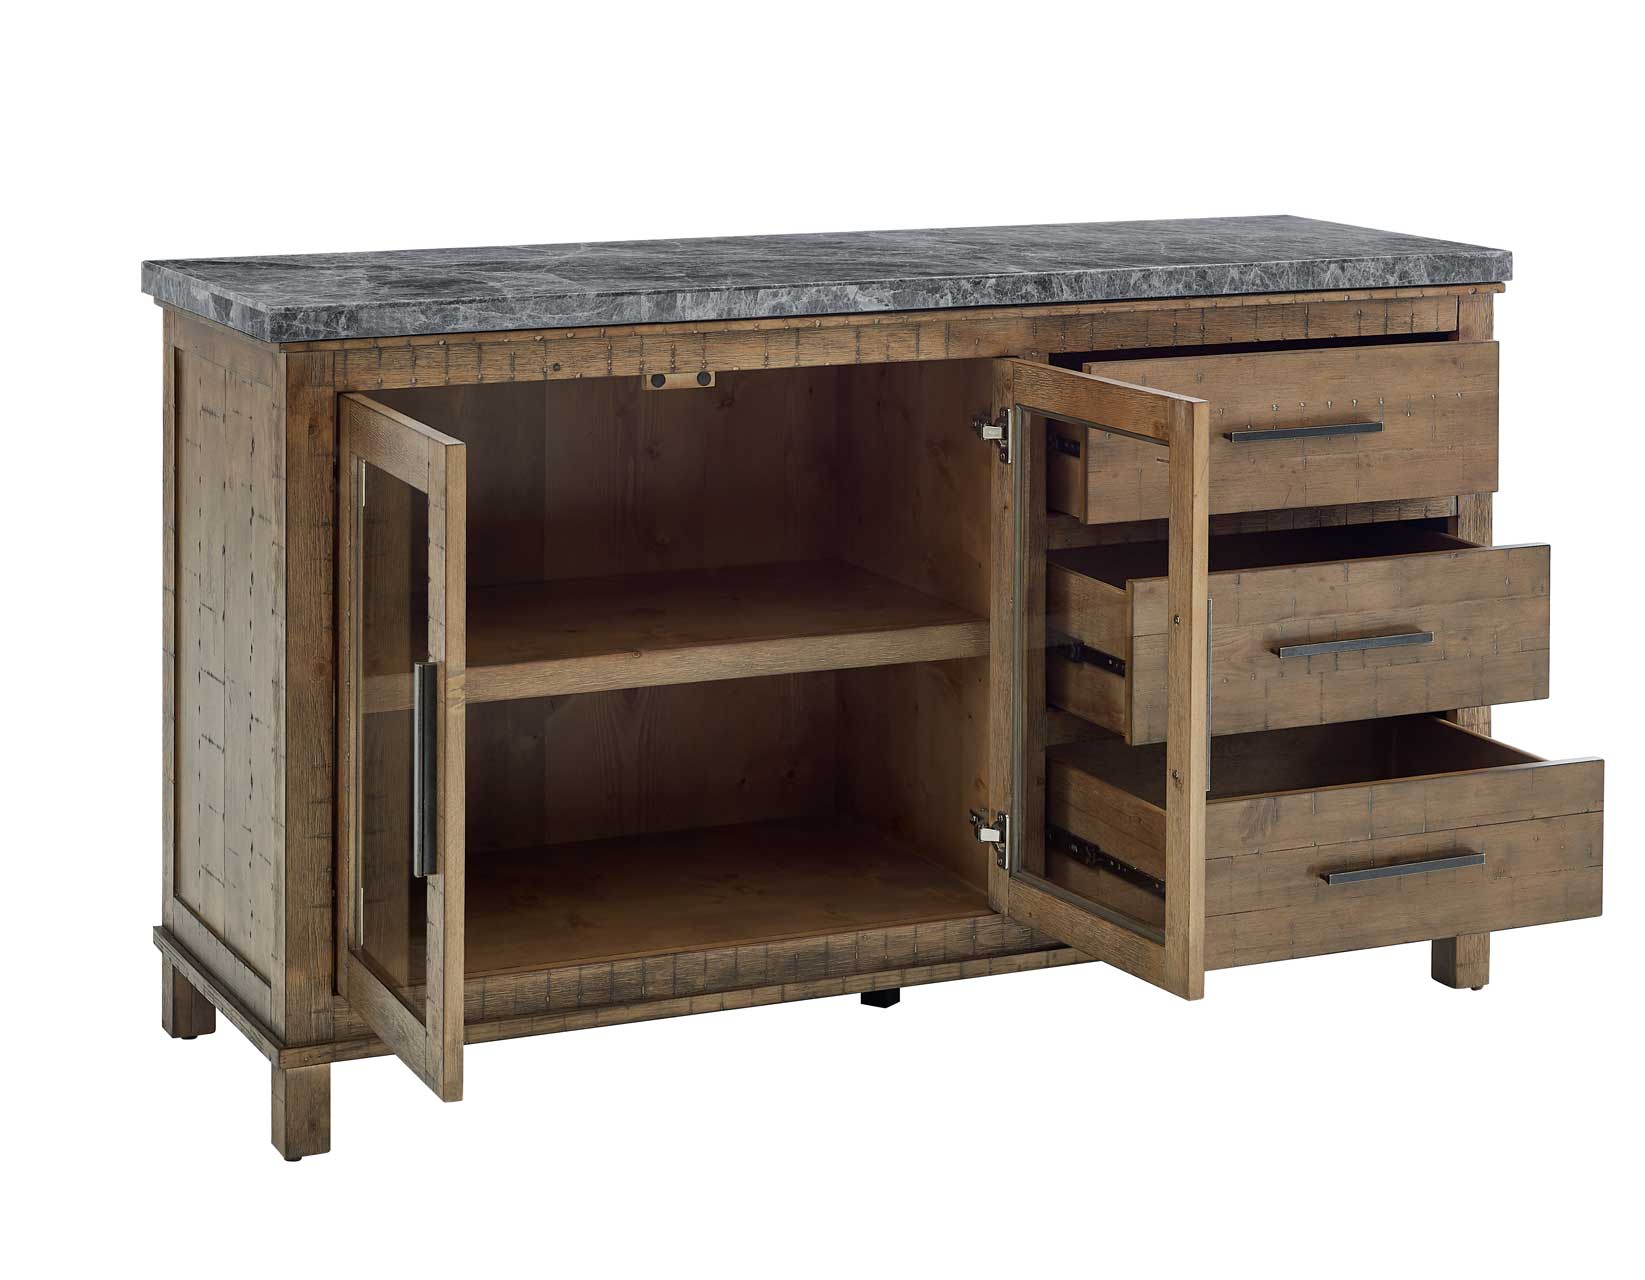 Grayson Marble Top Counter Storage Dining Collection by Steve silver